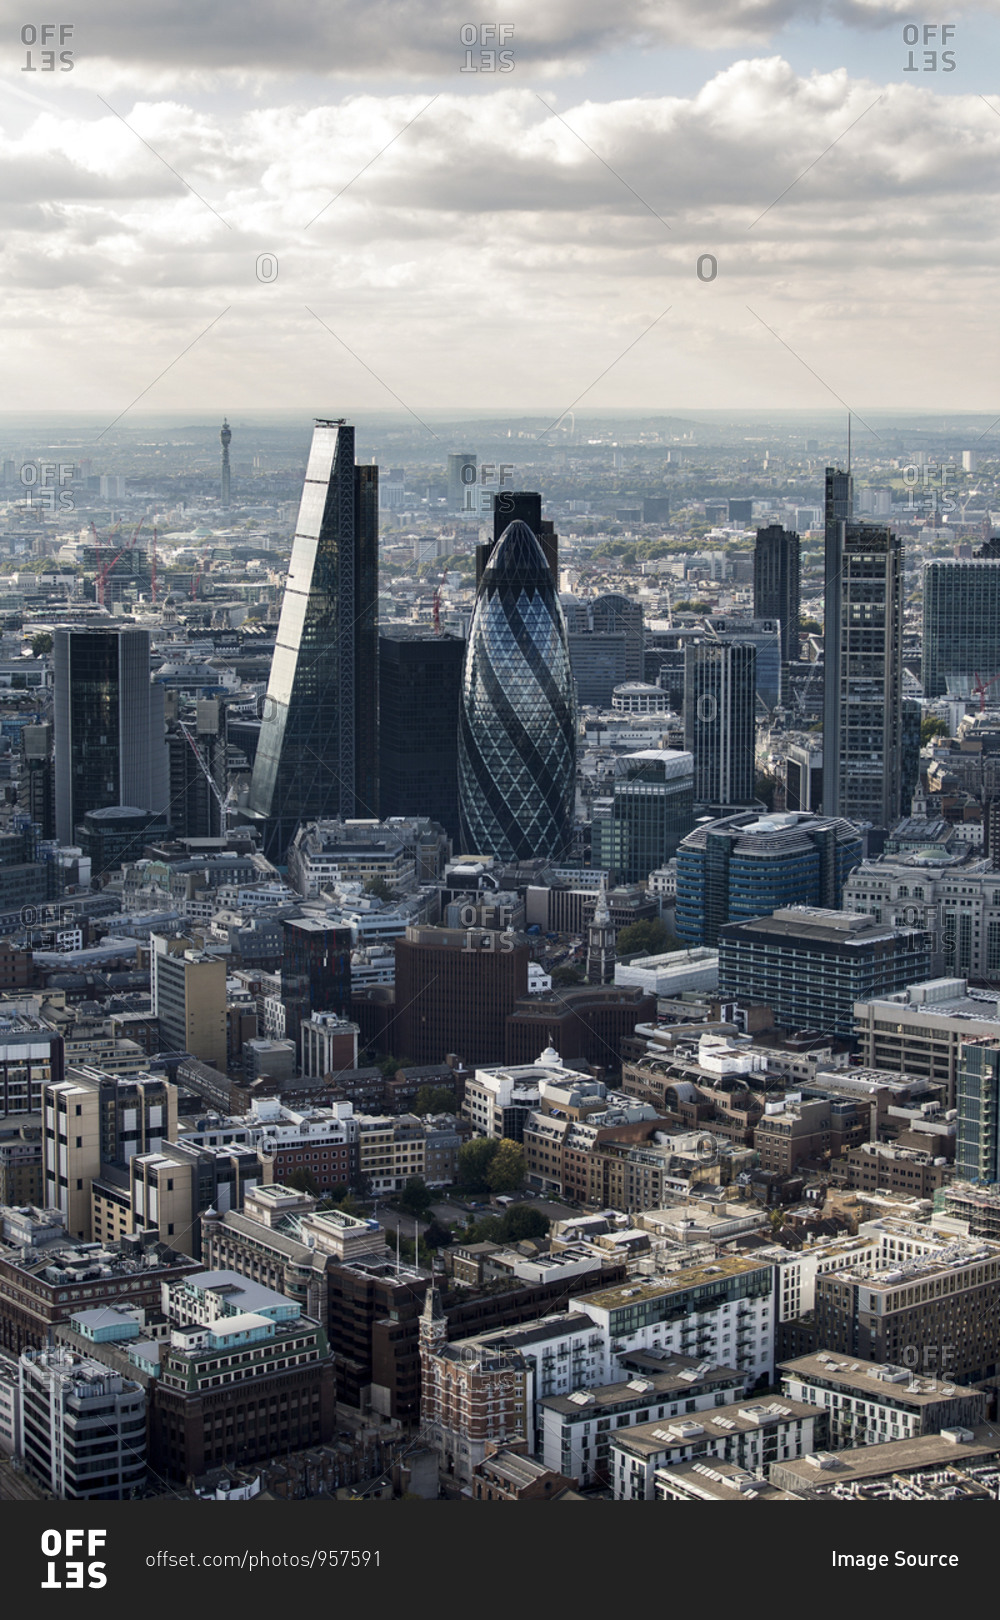 Aerial view of the Square Mile, the City of London financial center, with architectural landmarks.